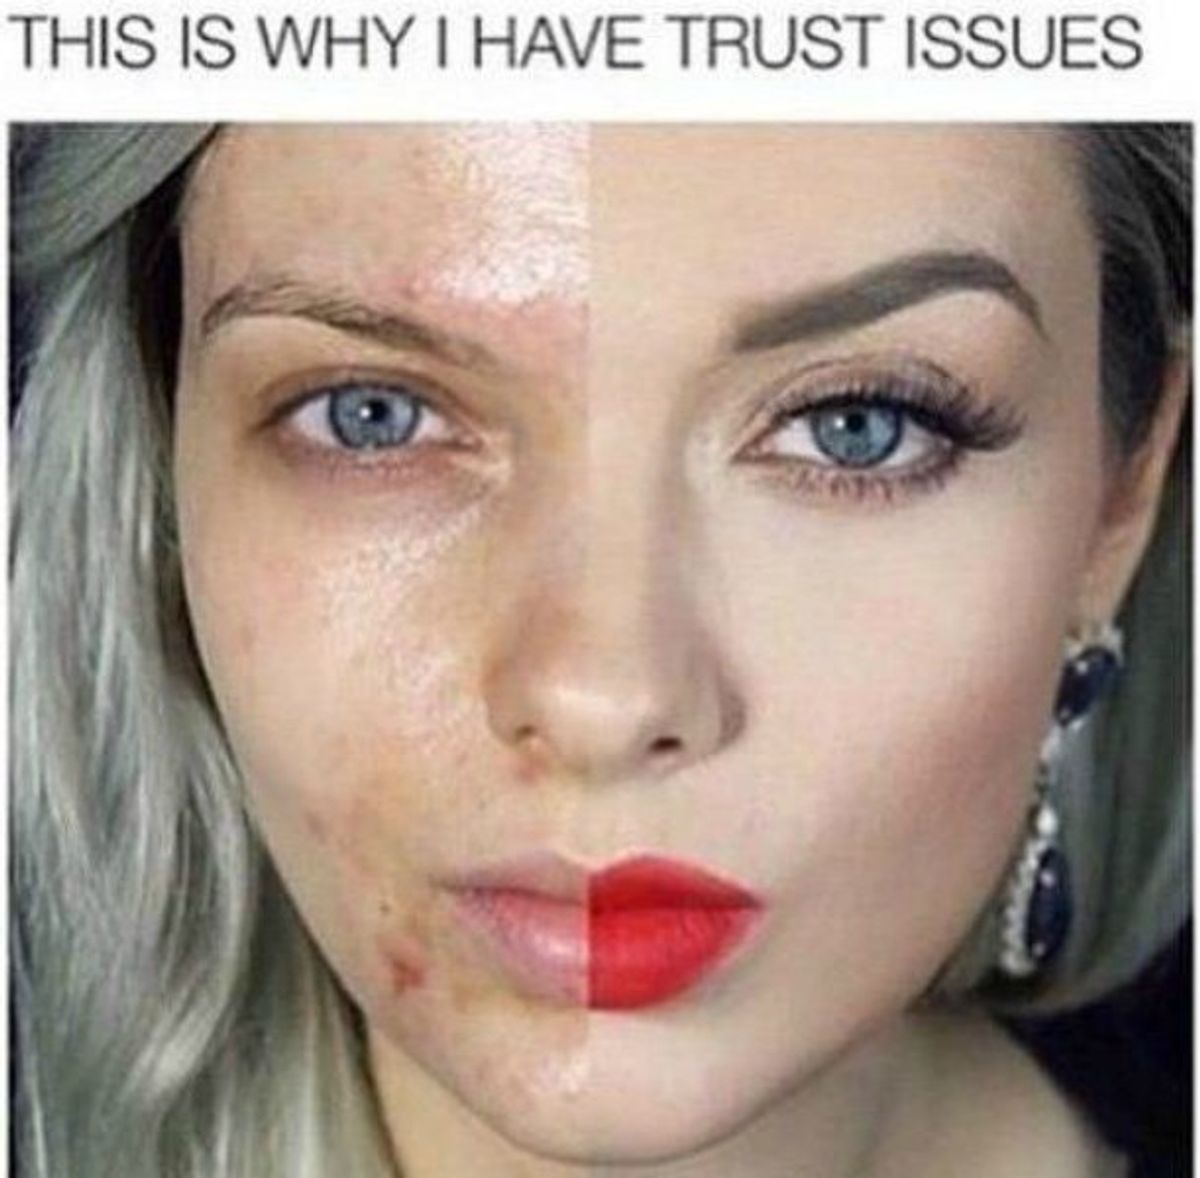 To Men Who Have "Trust Issues" When Women Wear Makeup